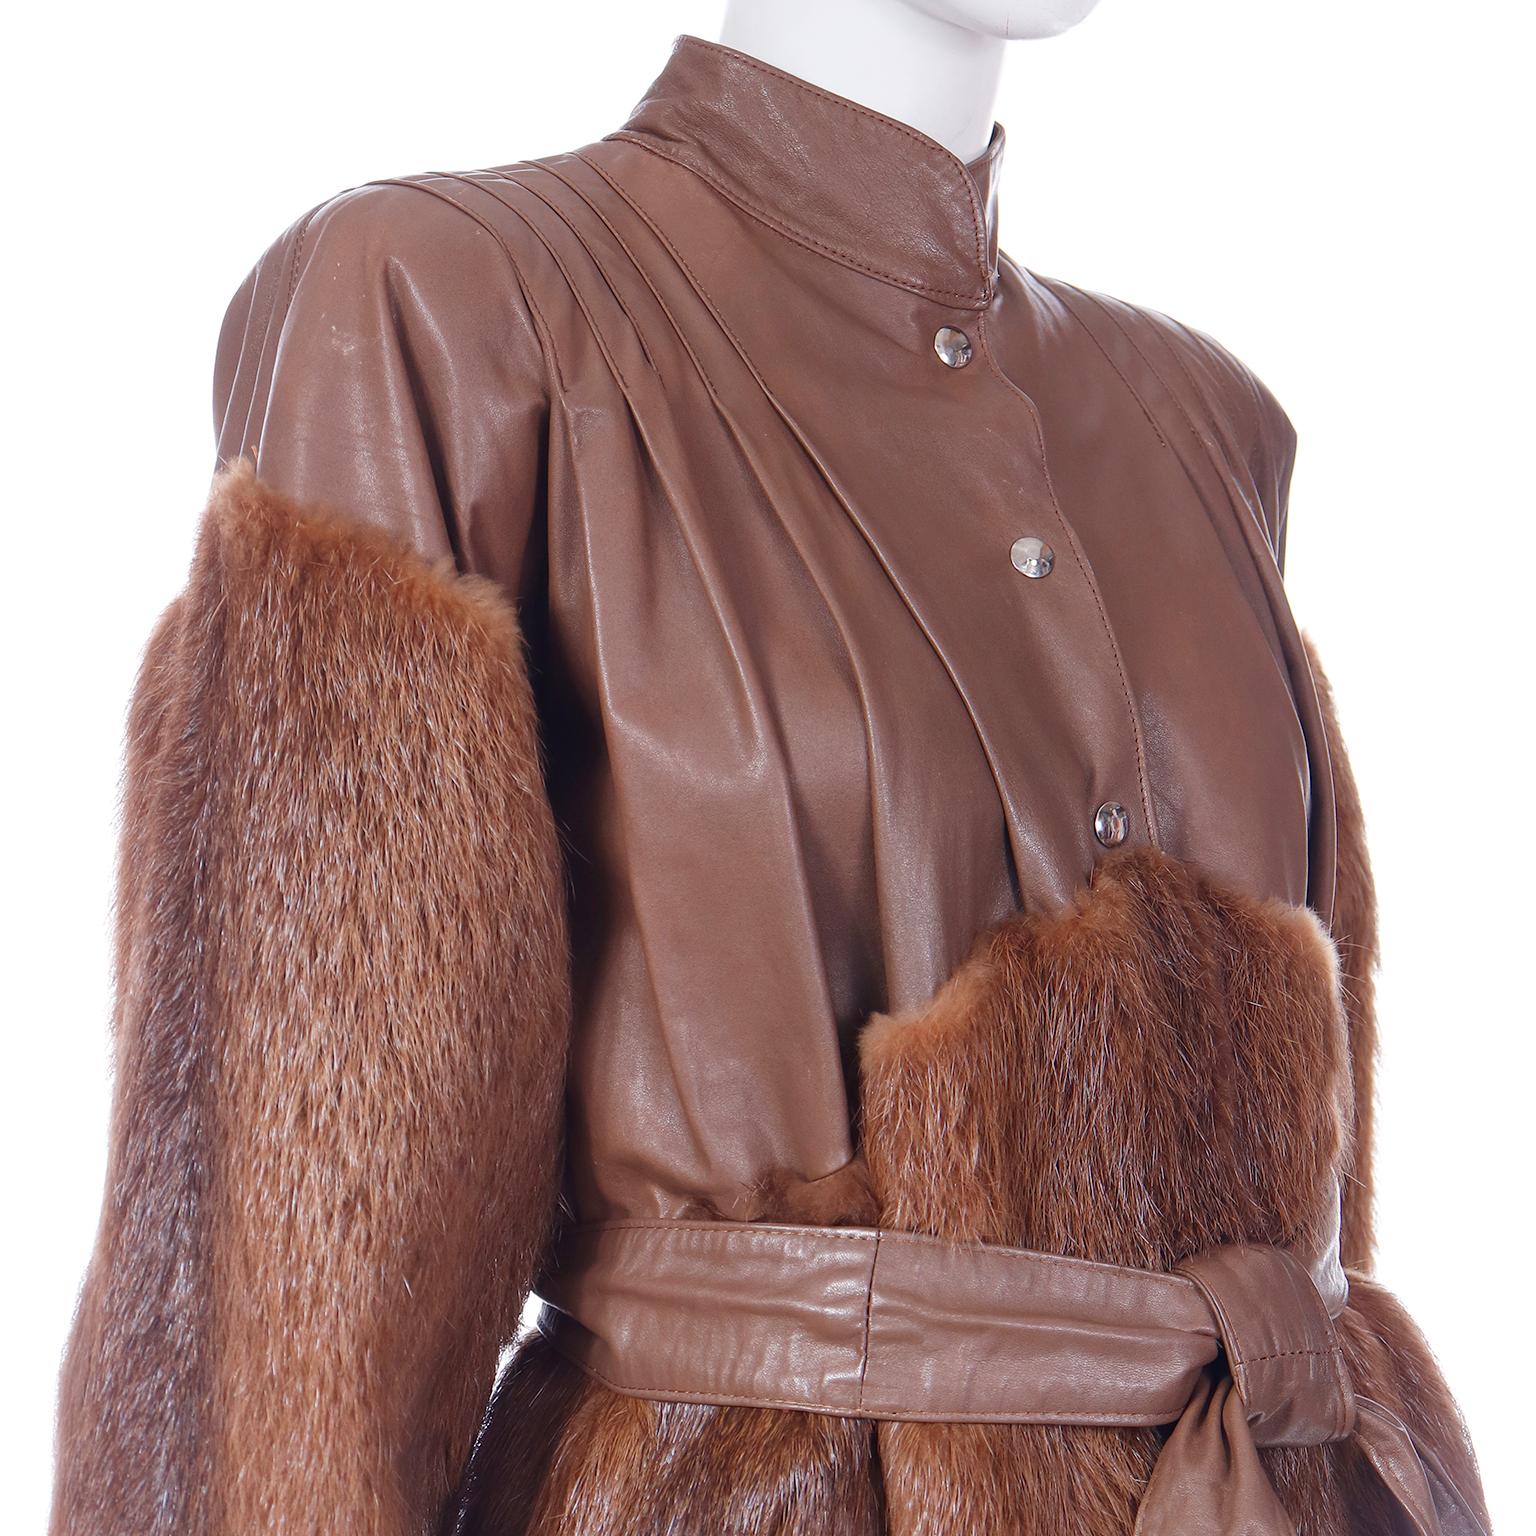 Yves Saint Laurent Fourrures Vintage Brown Leather and Fur Jacket With Belt 8